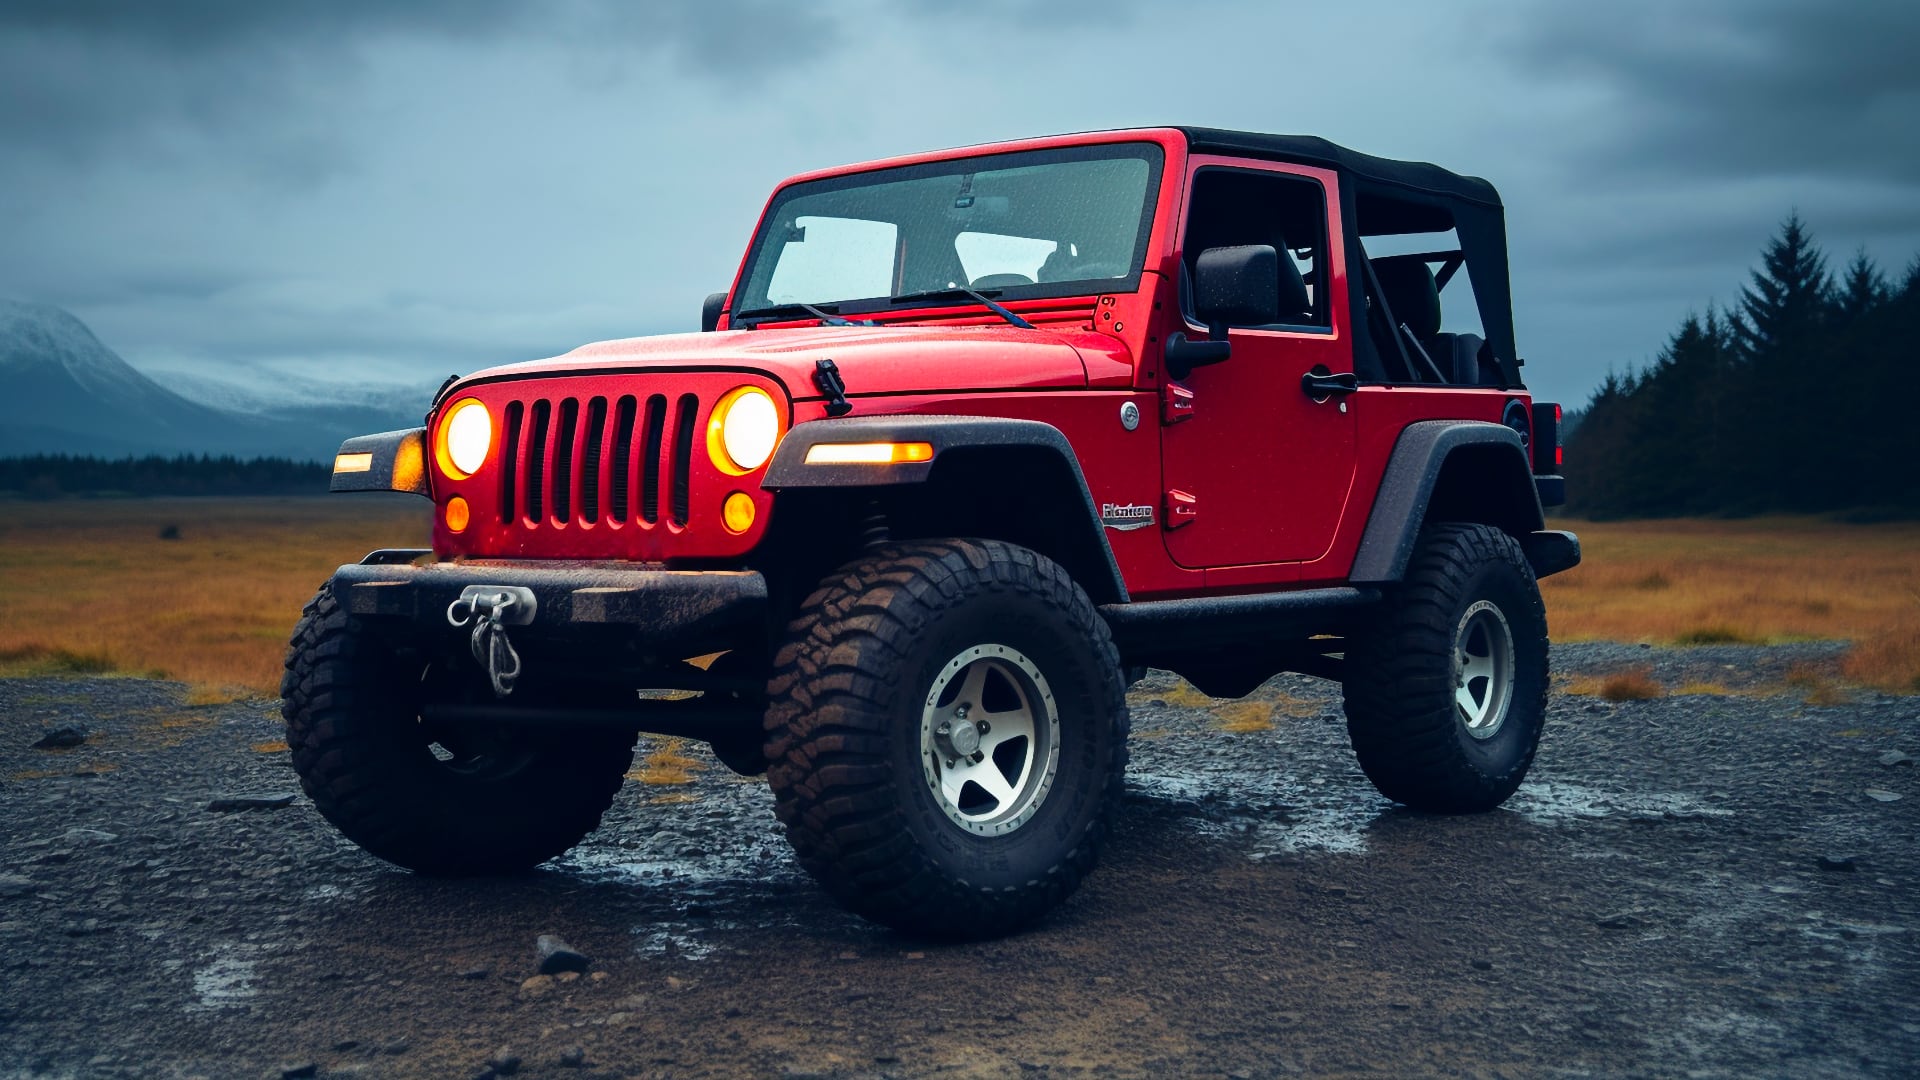 A red jeep parked on a dirt road, avoiding certain Jeep TJ years.